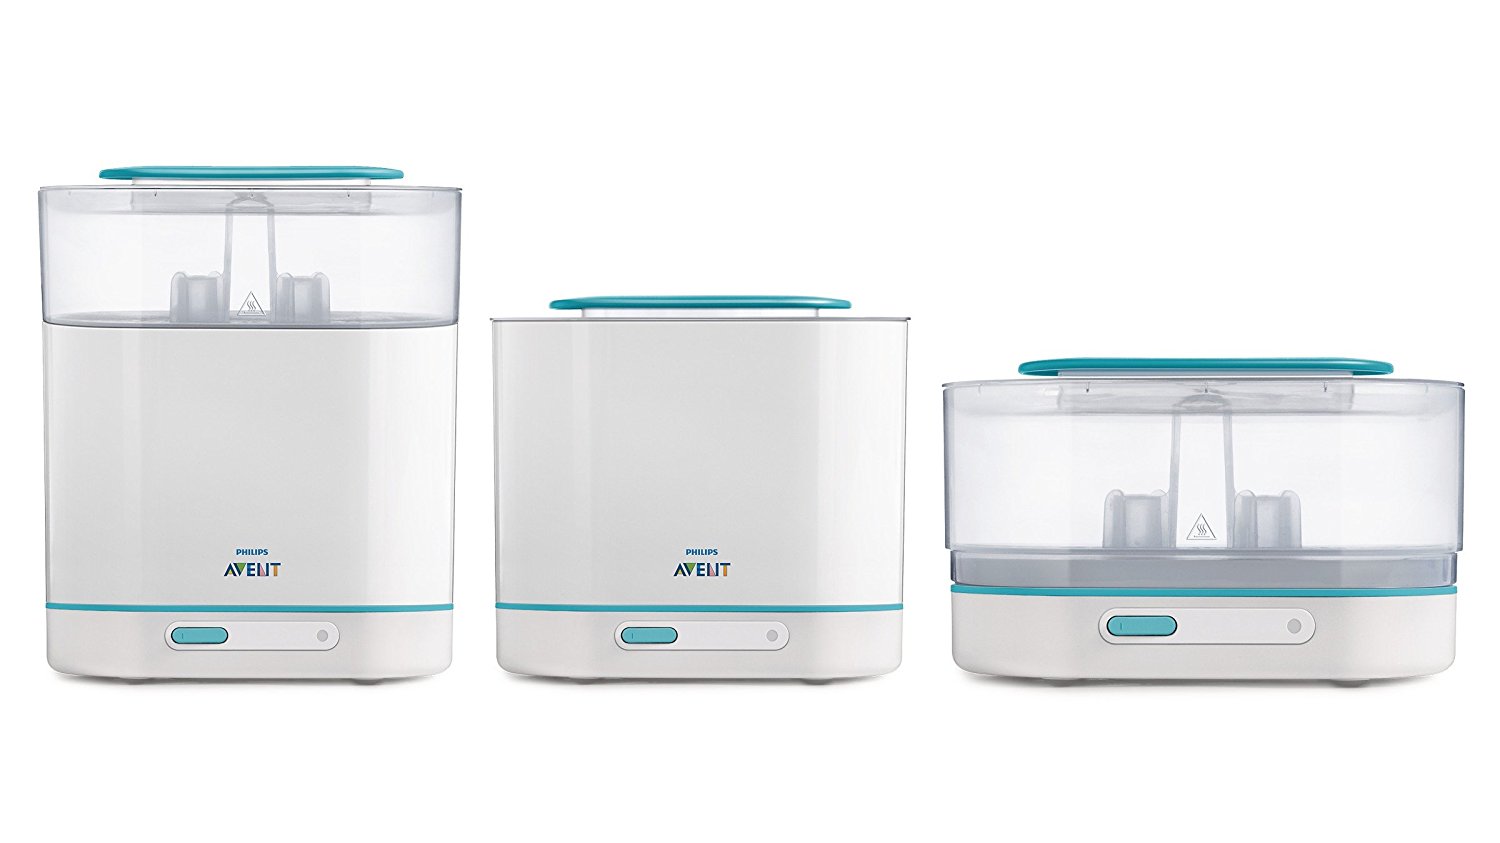 Mittens air Sailor Product Review: Philips Avent 3-in-1 Electric Steam Sterilizer and How to  Sterilize Baby Bottles! - Milton Goh Blog